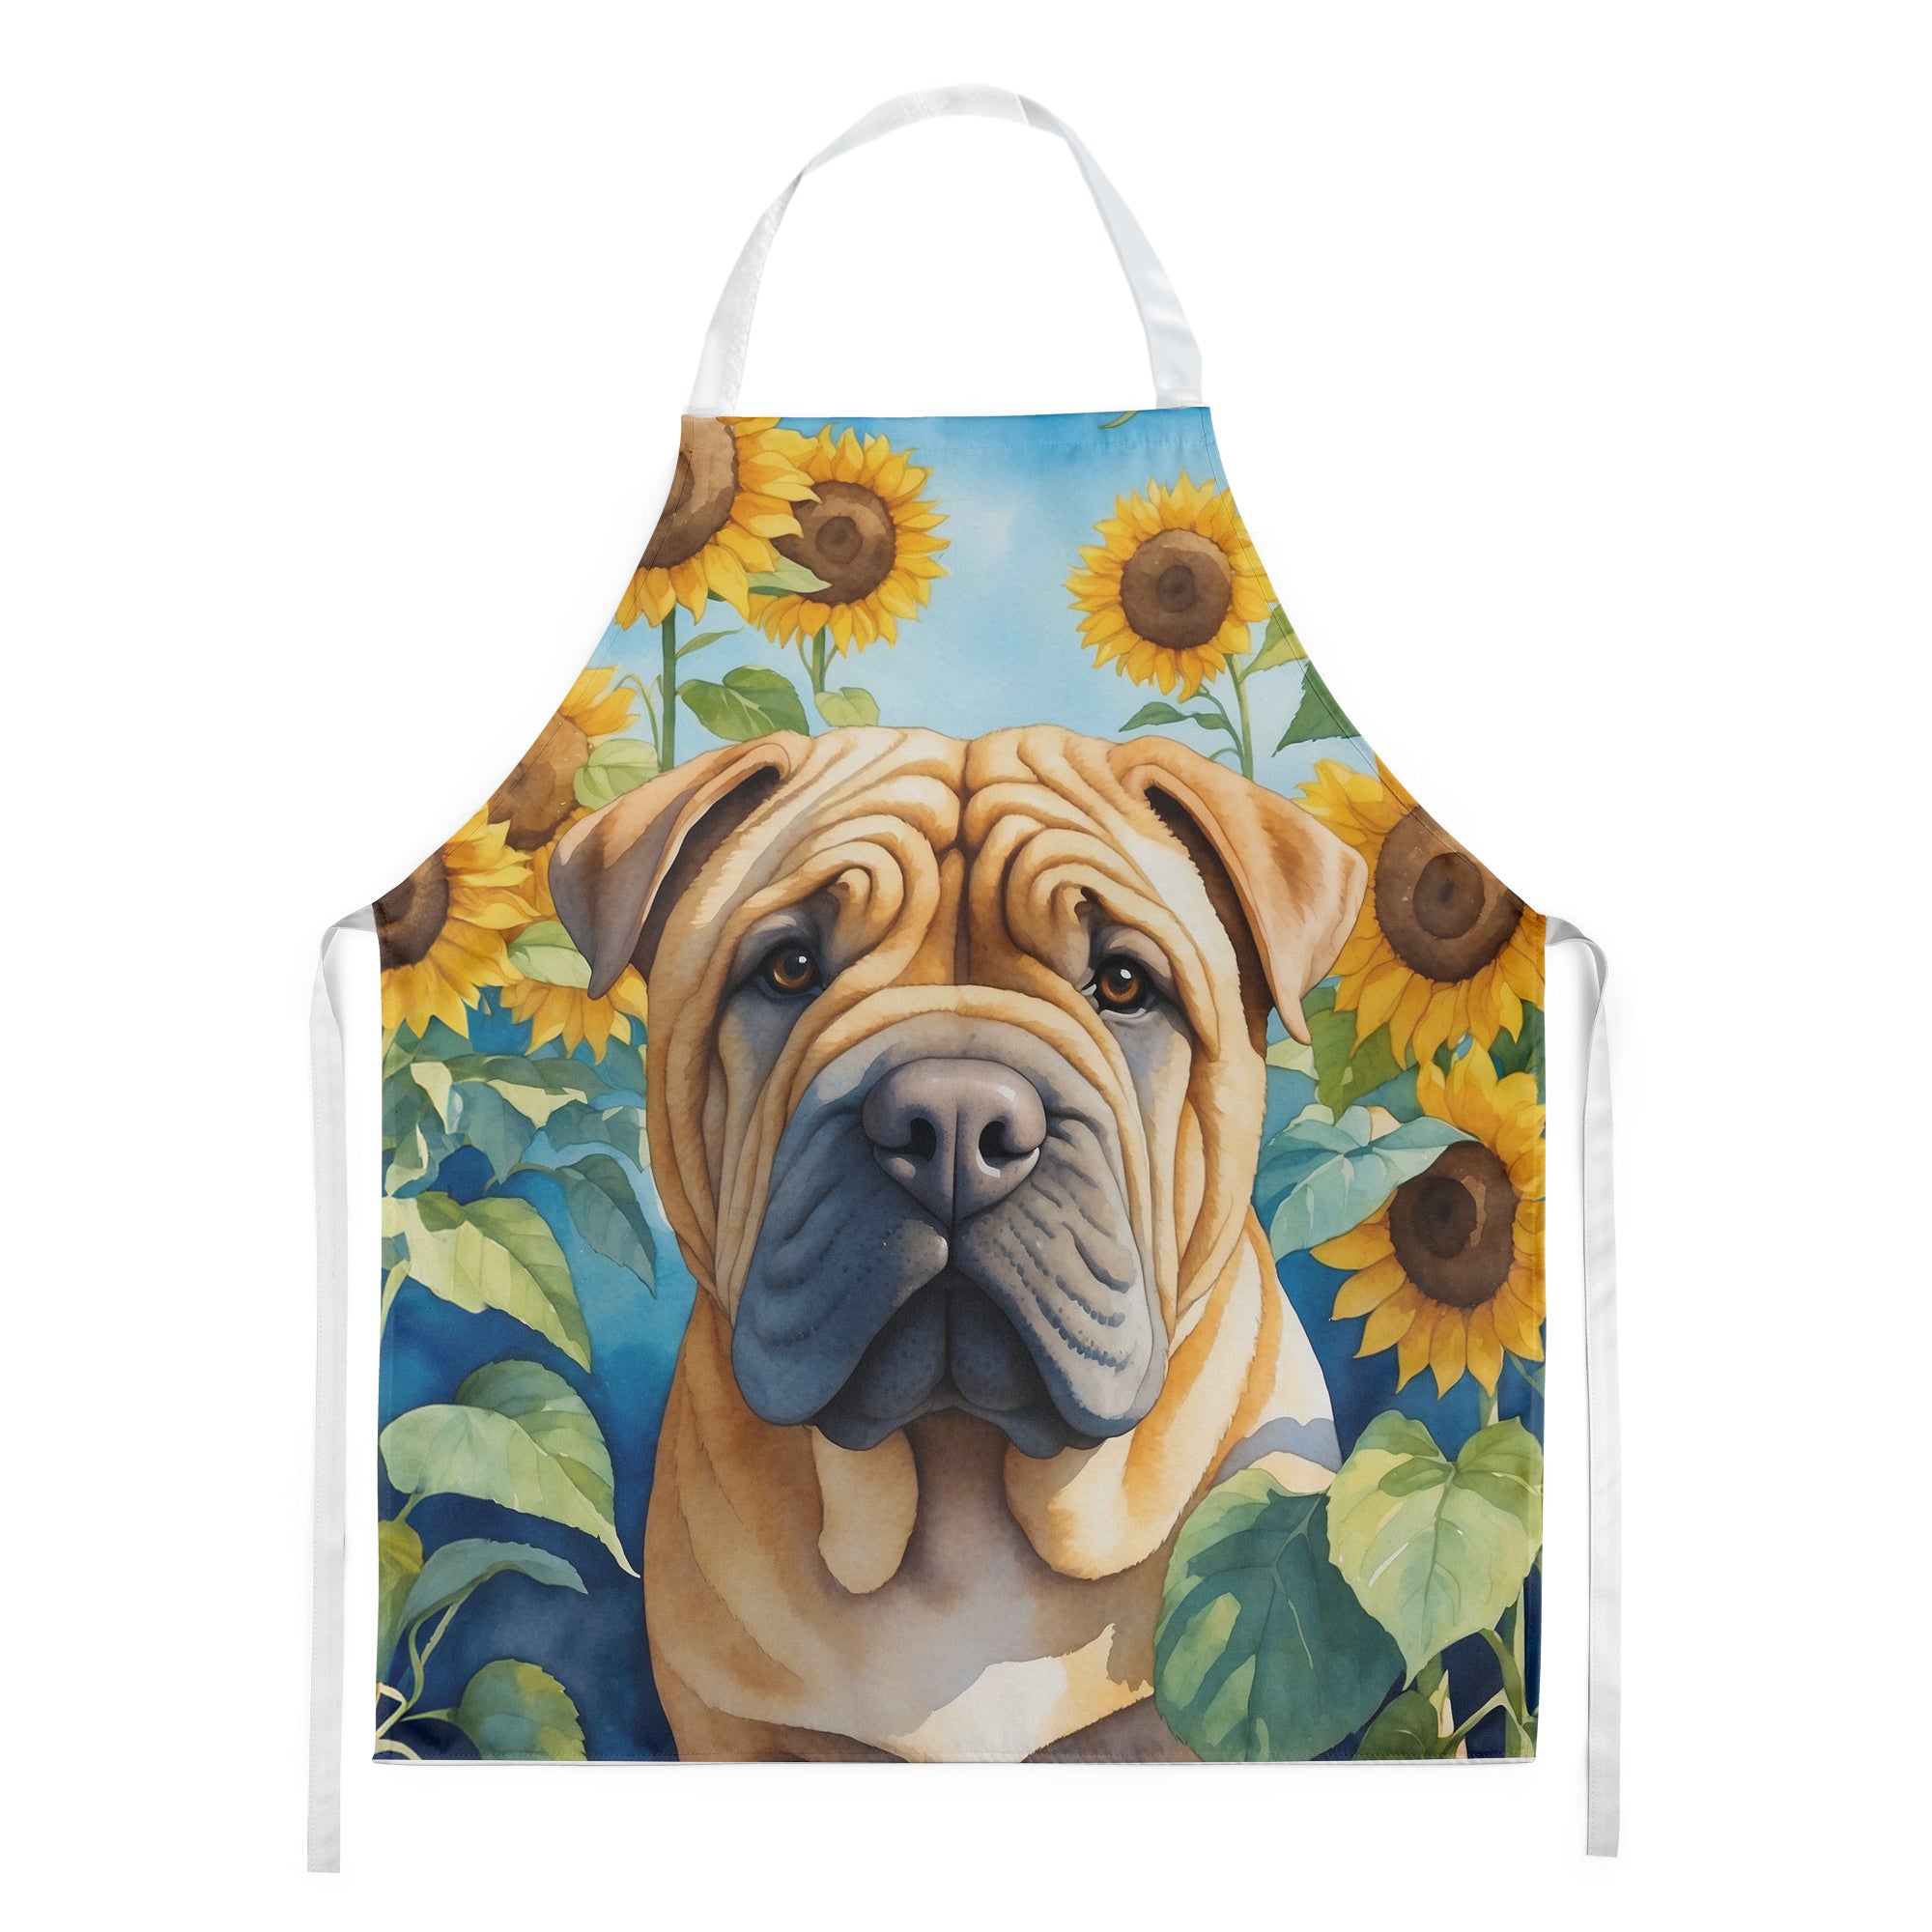 Buy this Shar Pei in Sunflowers Apron